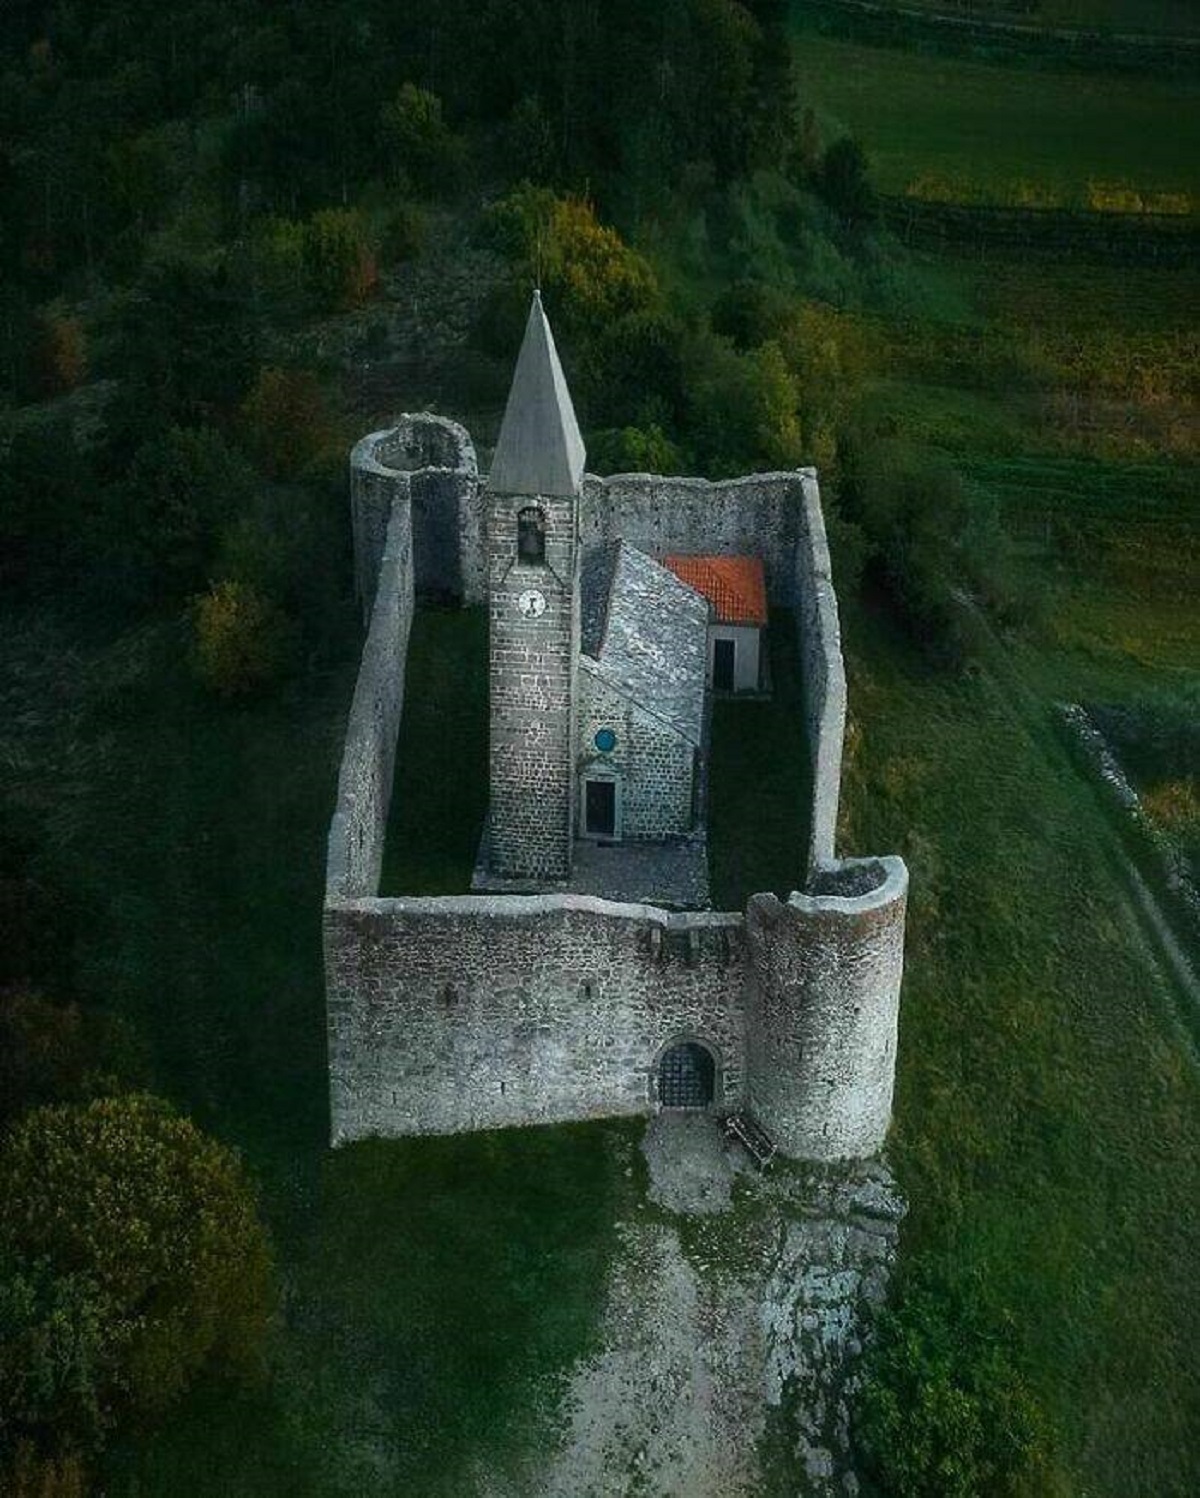 "Holy Trinity Church, A Historical Building In Hrastovlje, A Village In Southwestern Slovenia, It Is A Romanesque Church From 12th Century Ce. Church Stands Behind A Wall That Local Population Built To Protect Itself From Turkish Attacks In 16th Century Ce"